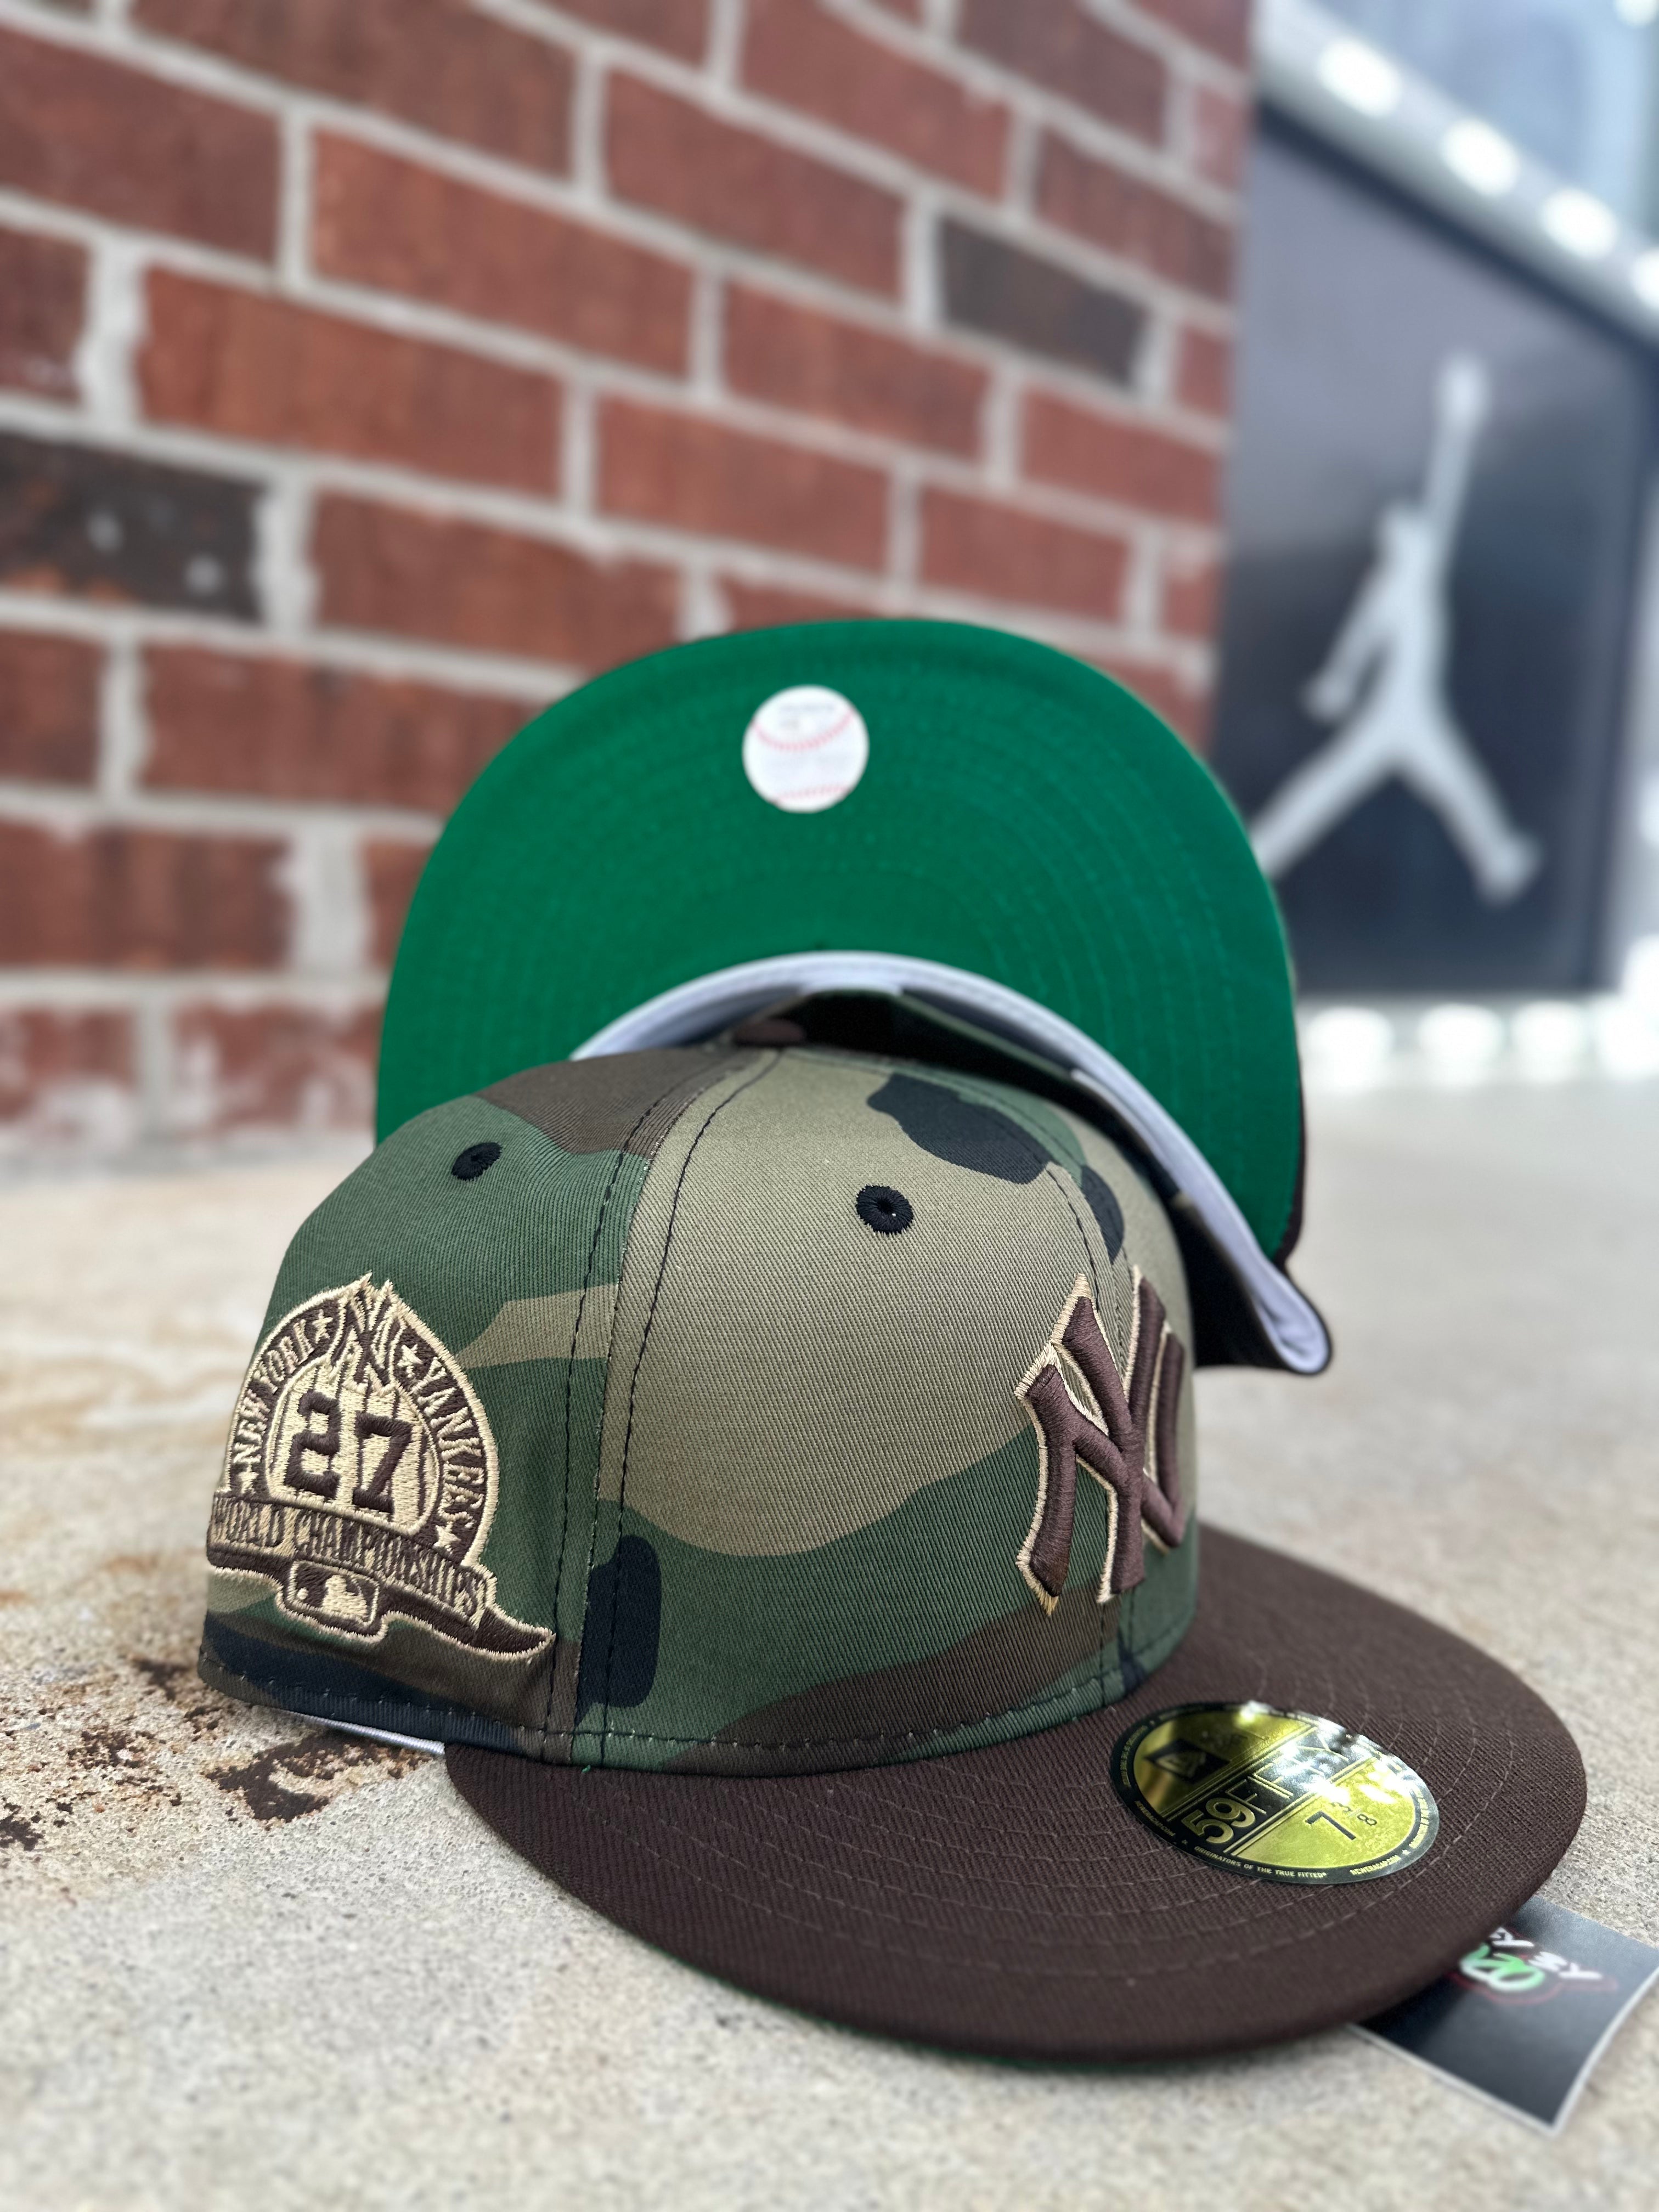 New Era 59 FIFTY Fitted "New York Yankees" 27x World Champions Camo/Mocha Brown